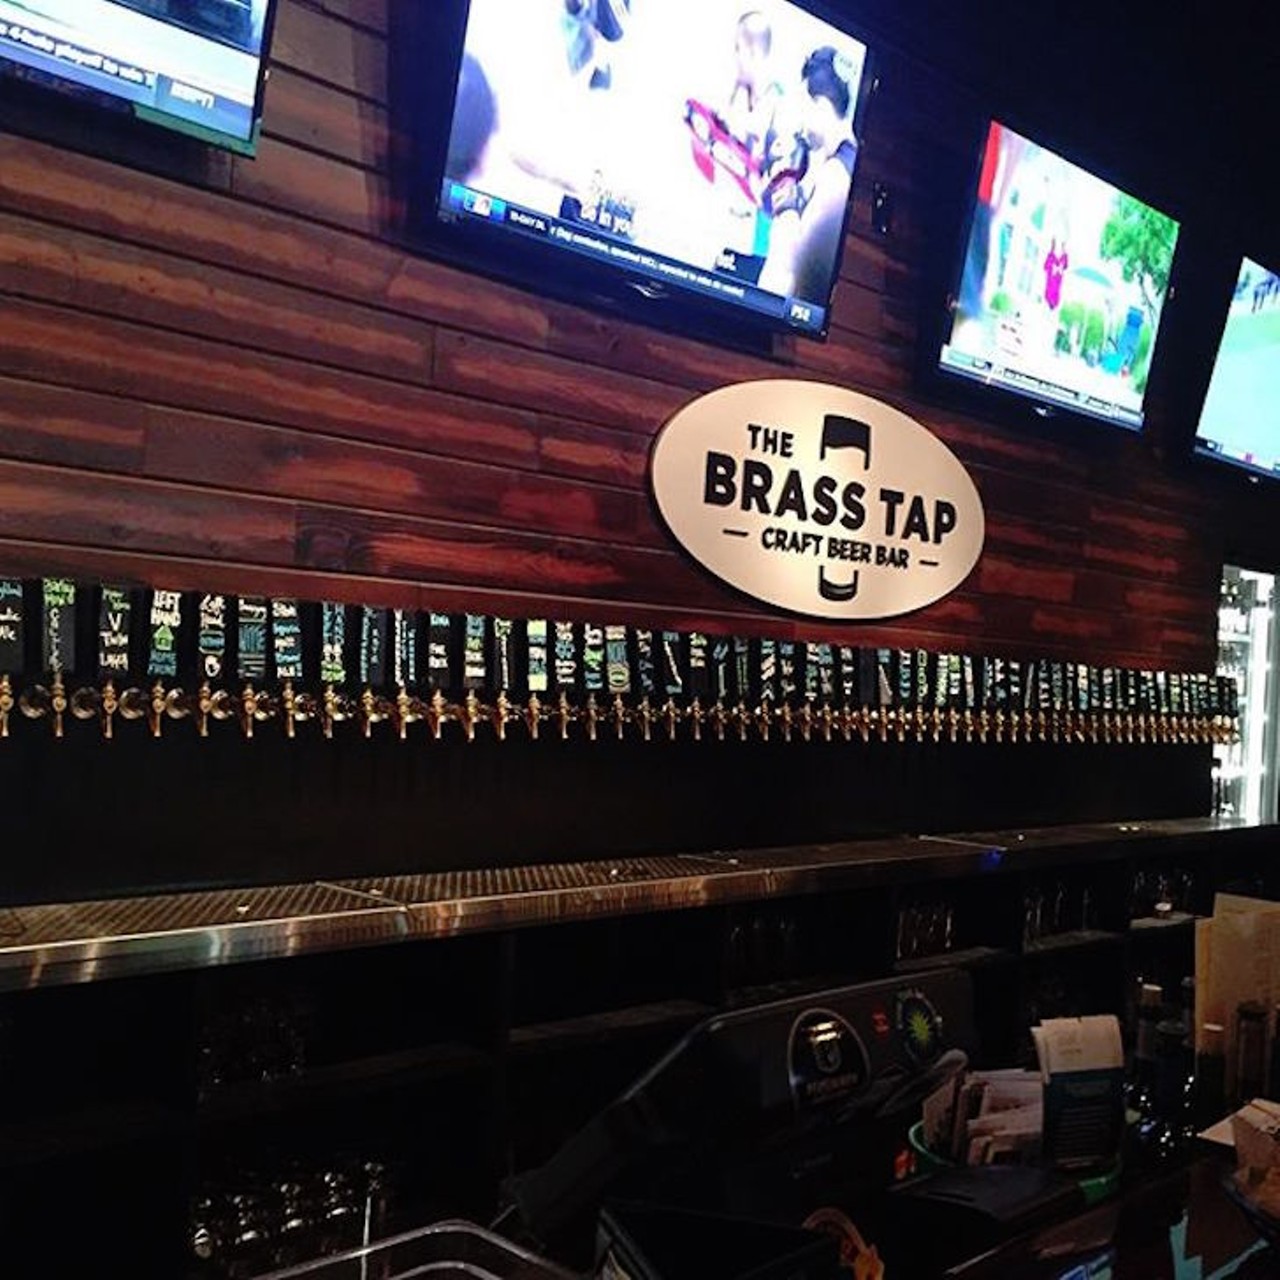 Brass Tap
1632 N. Mills Ave., 407-270-9538
16 TVs
This upscale beer bar gives guests the choice of enjoying any of the 80 craft beers on tap, 300+ imports and local craft beers, along with a variety of premium wines and cigars. 
Photo via ellisdrew13/Instagram